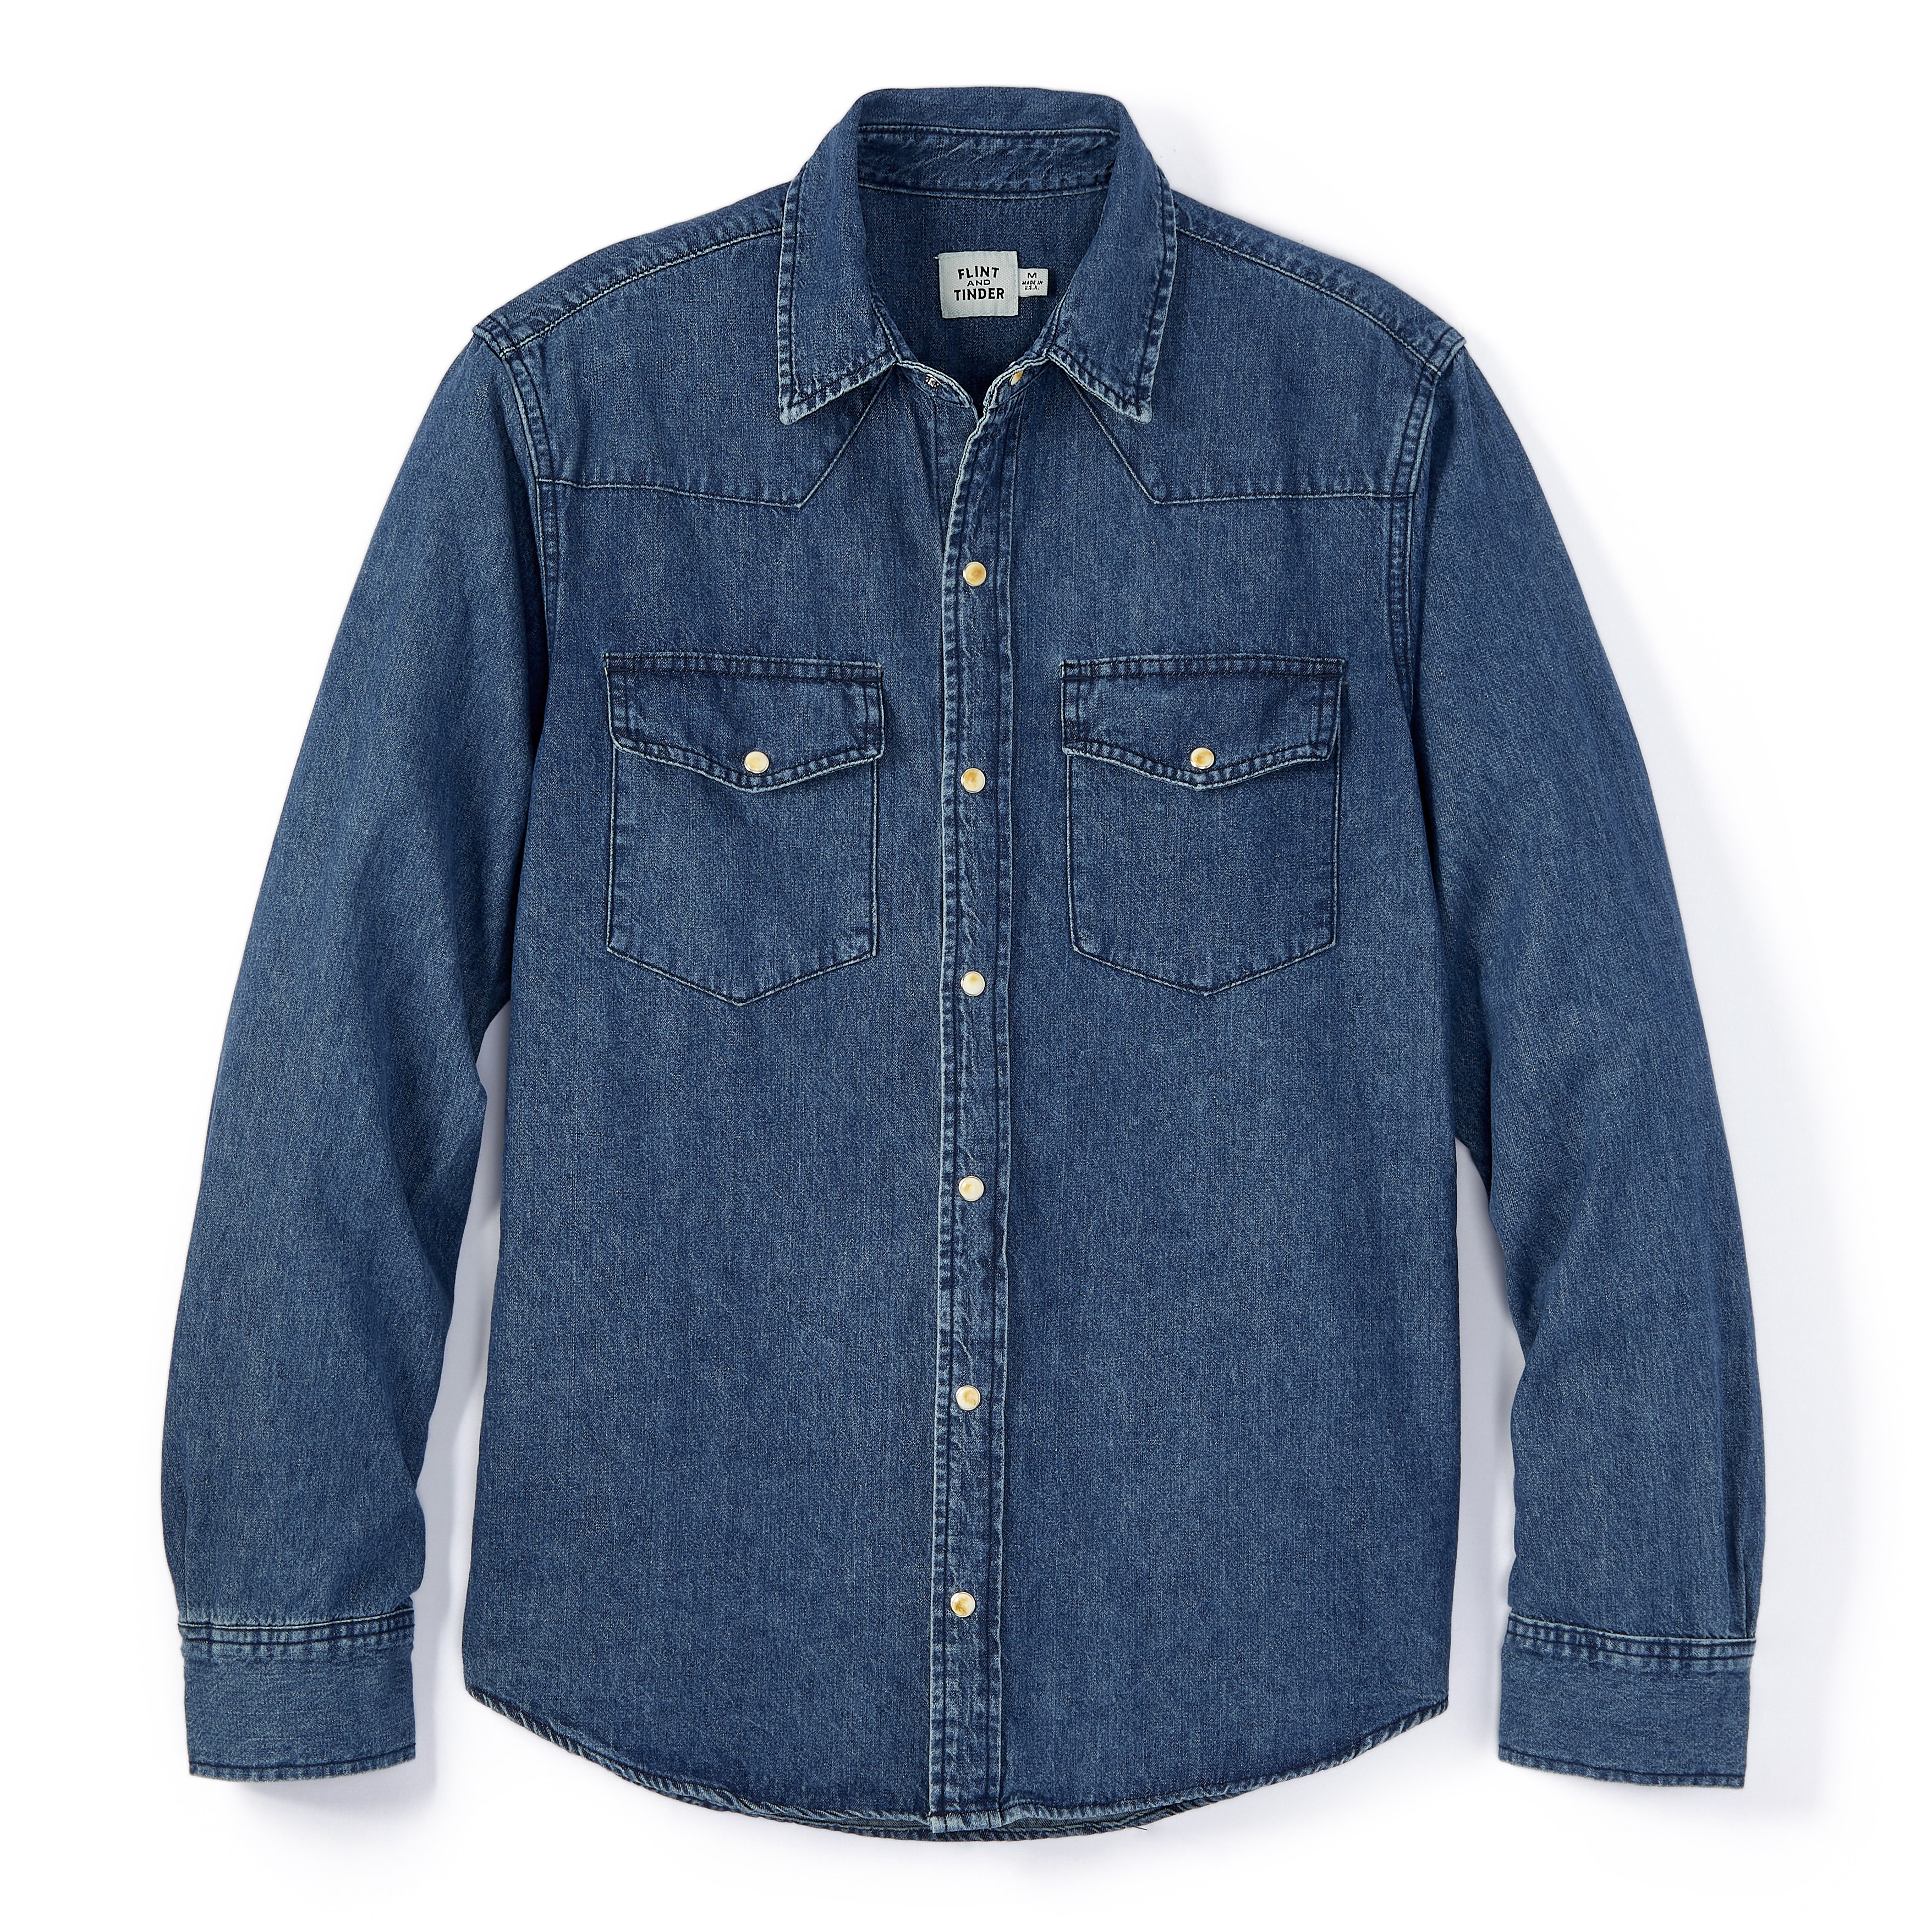 How to Wear Denim Shirts for Men: Tips and Tricks - Tistabene